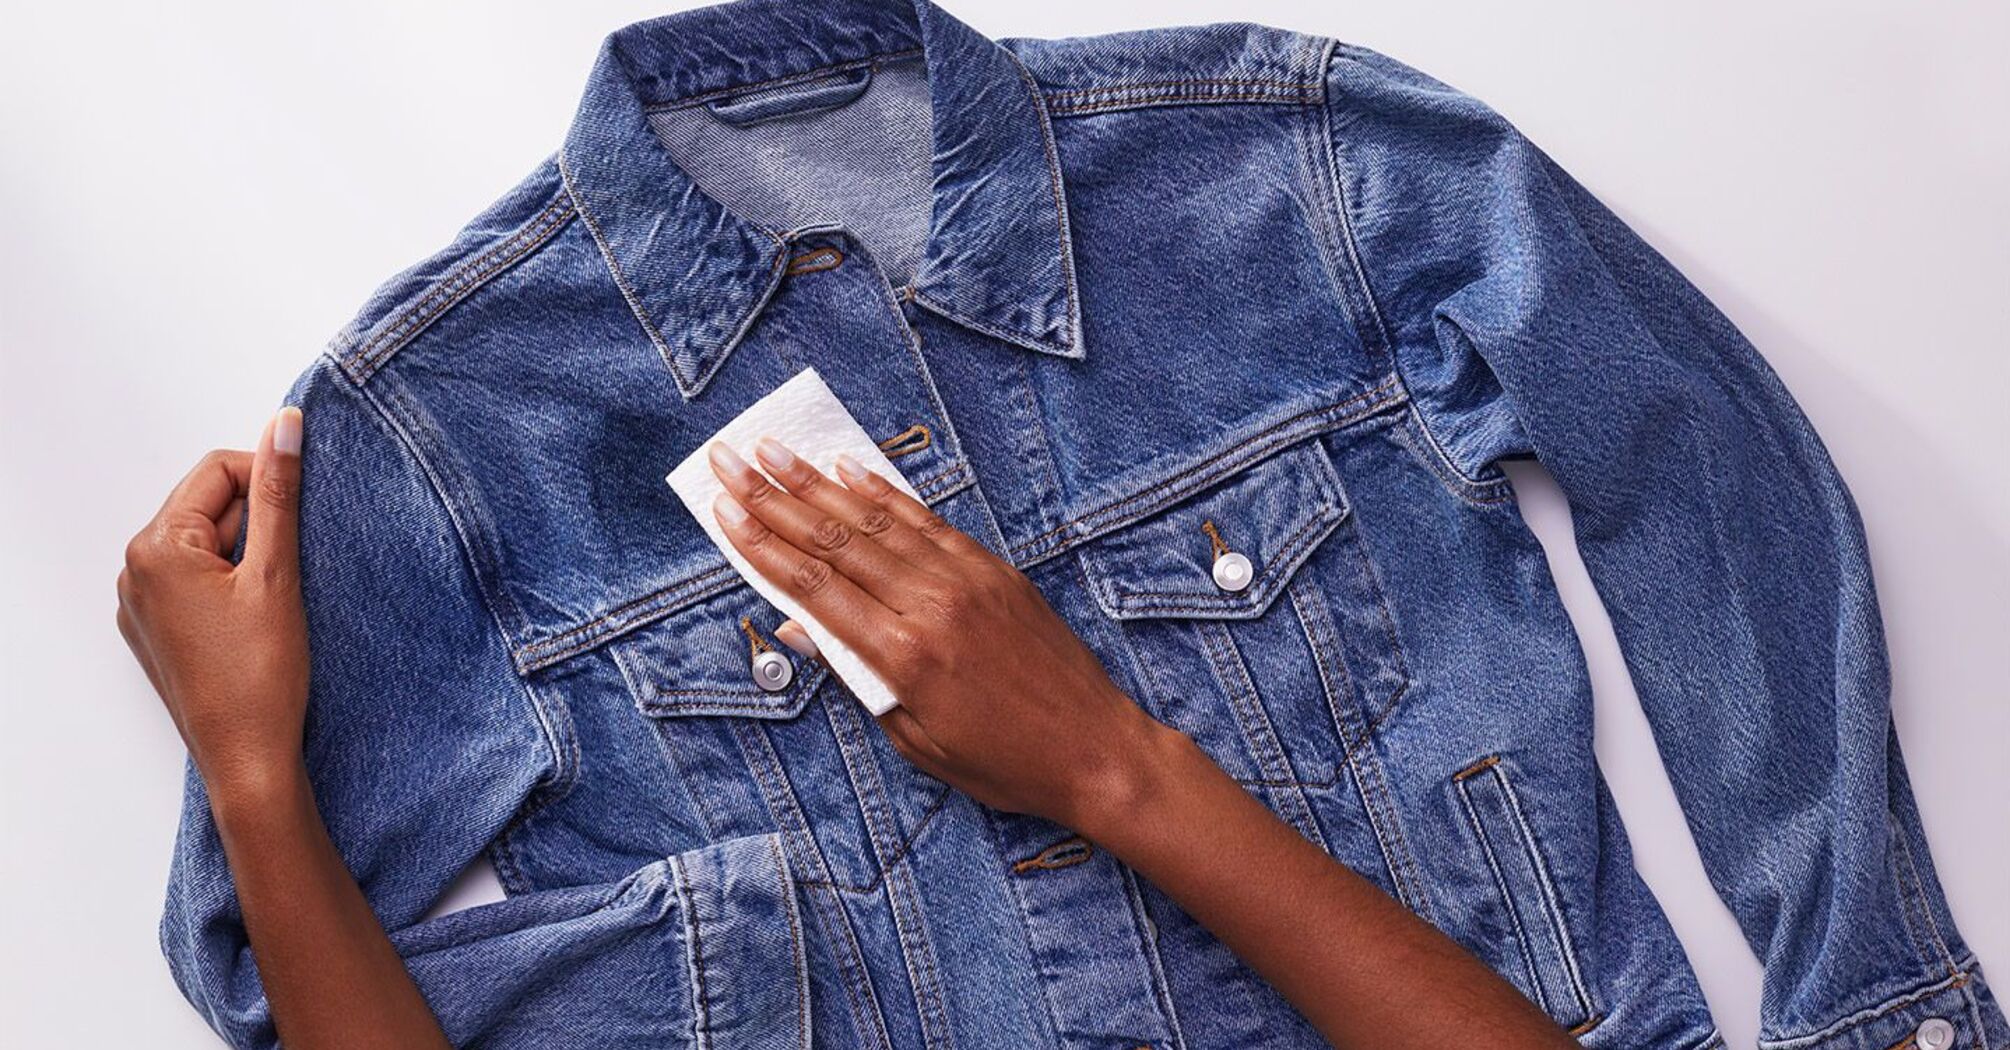 How to remove greasy stains from a jacket